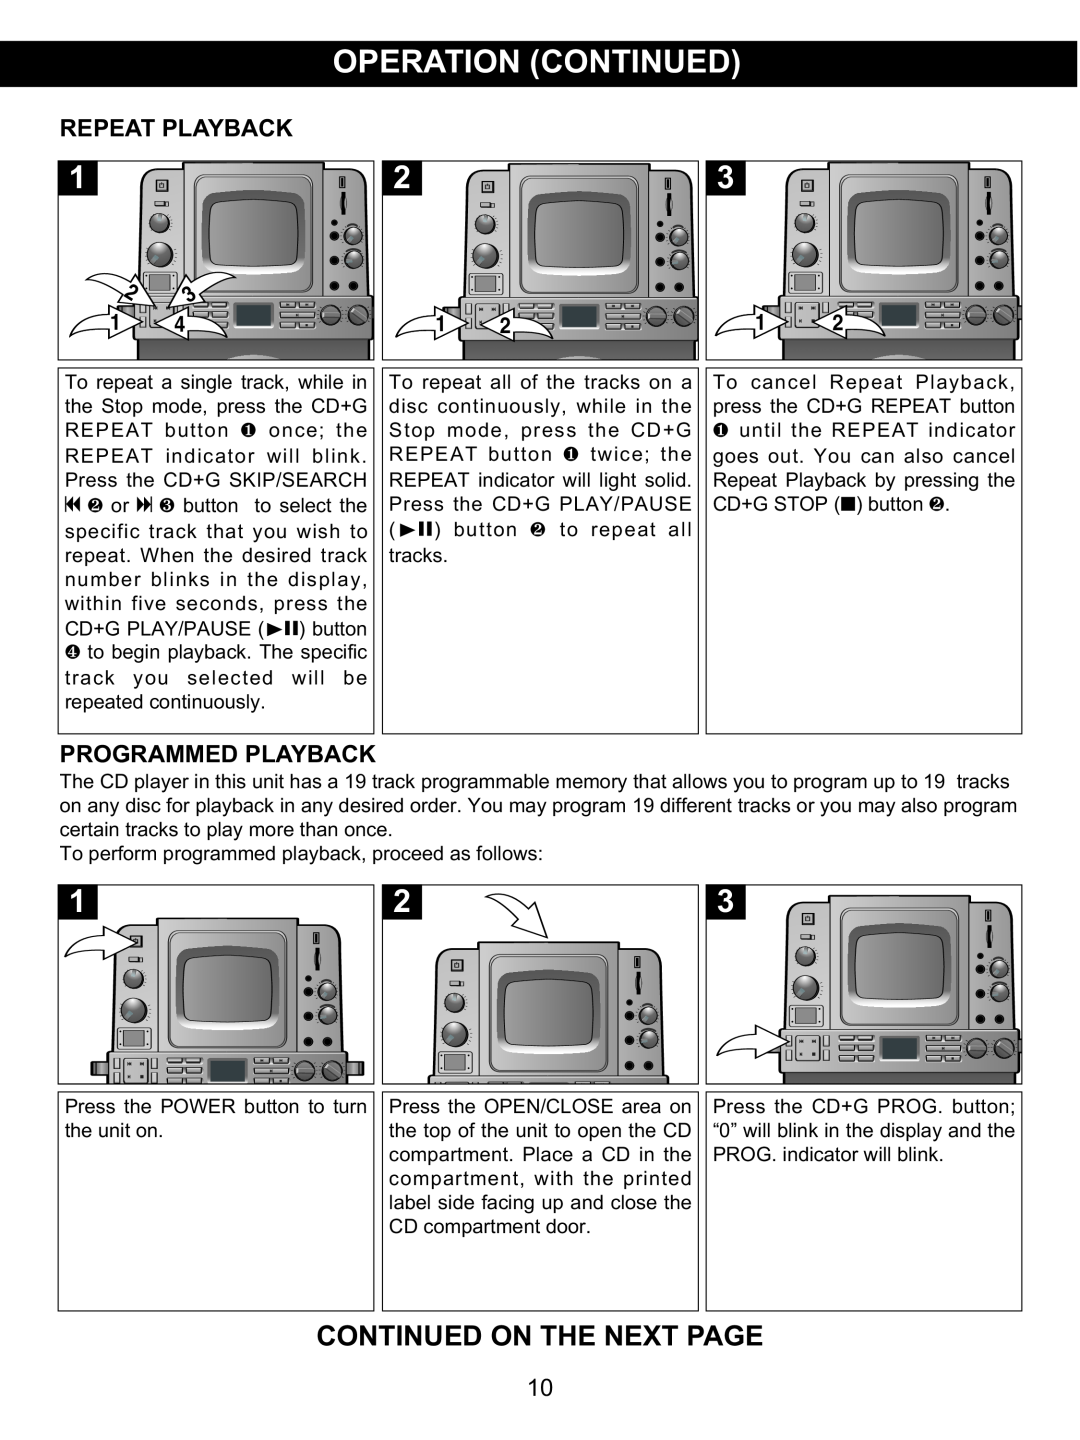 Memorex MKS8590 manual Continued On The Next Page, Repeat Playback, Programmed Playback 